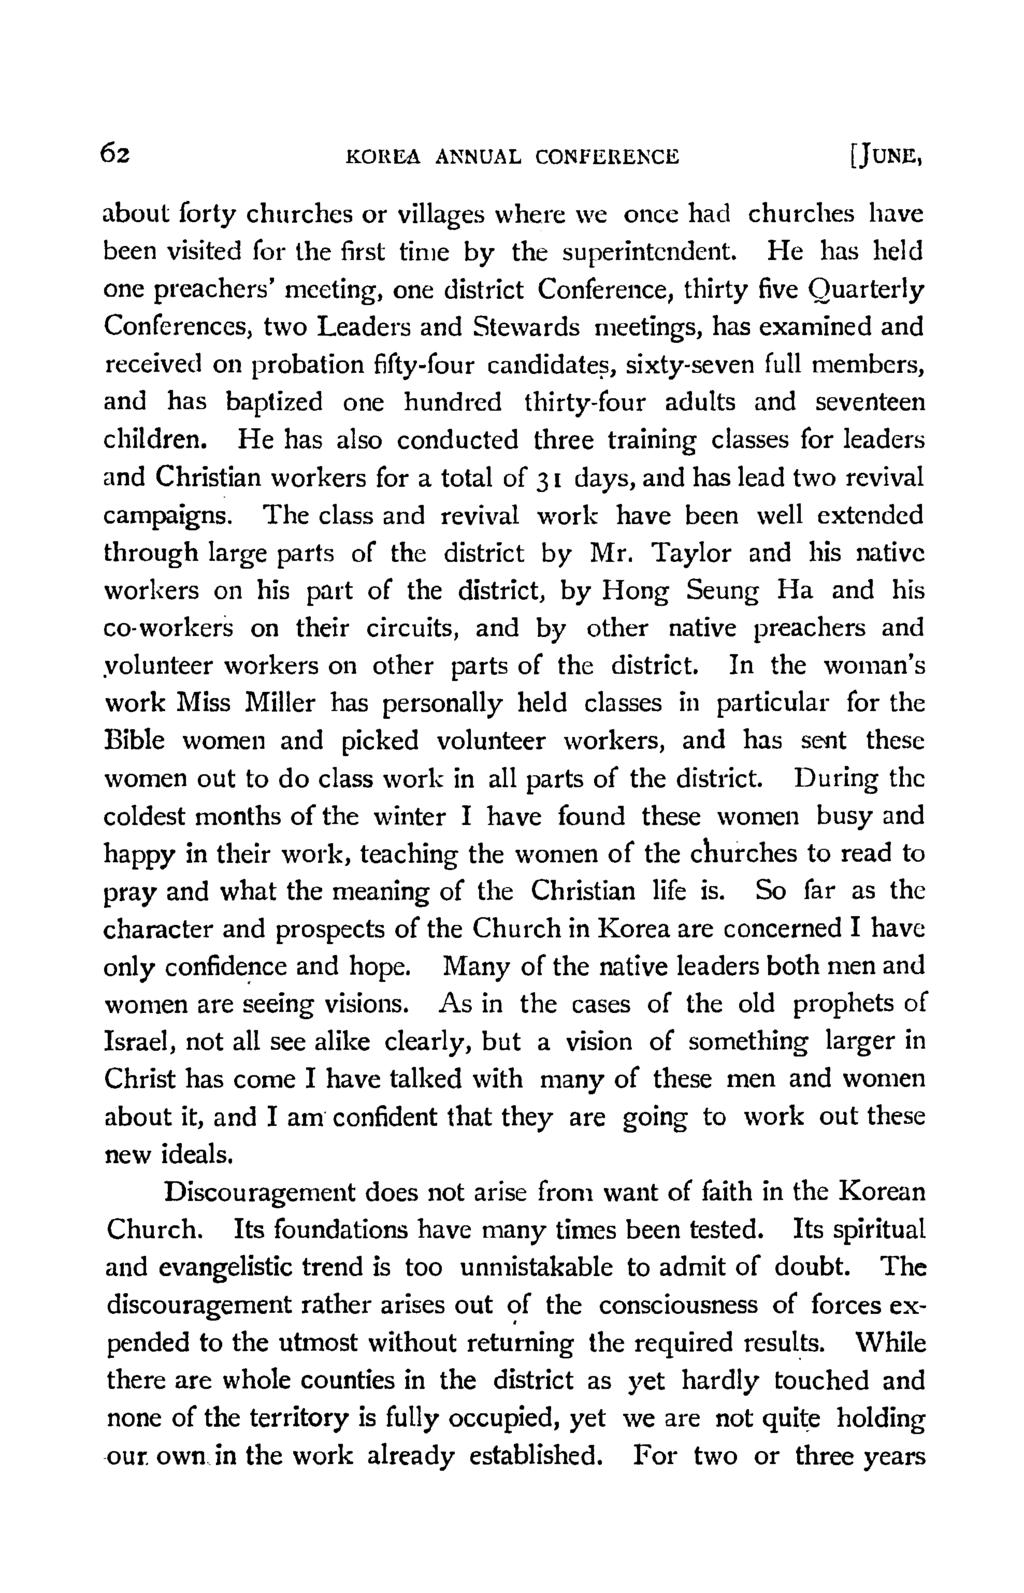 62 KOREA ANNUAL CONFERENCE [JUNE 1 about forty churches or villages where we once had churches have been visited for the first time by the superintendent.